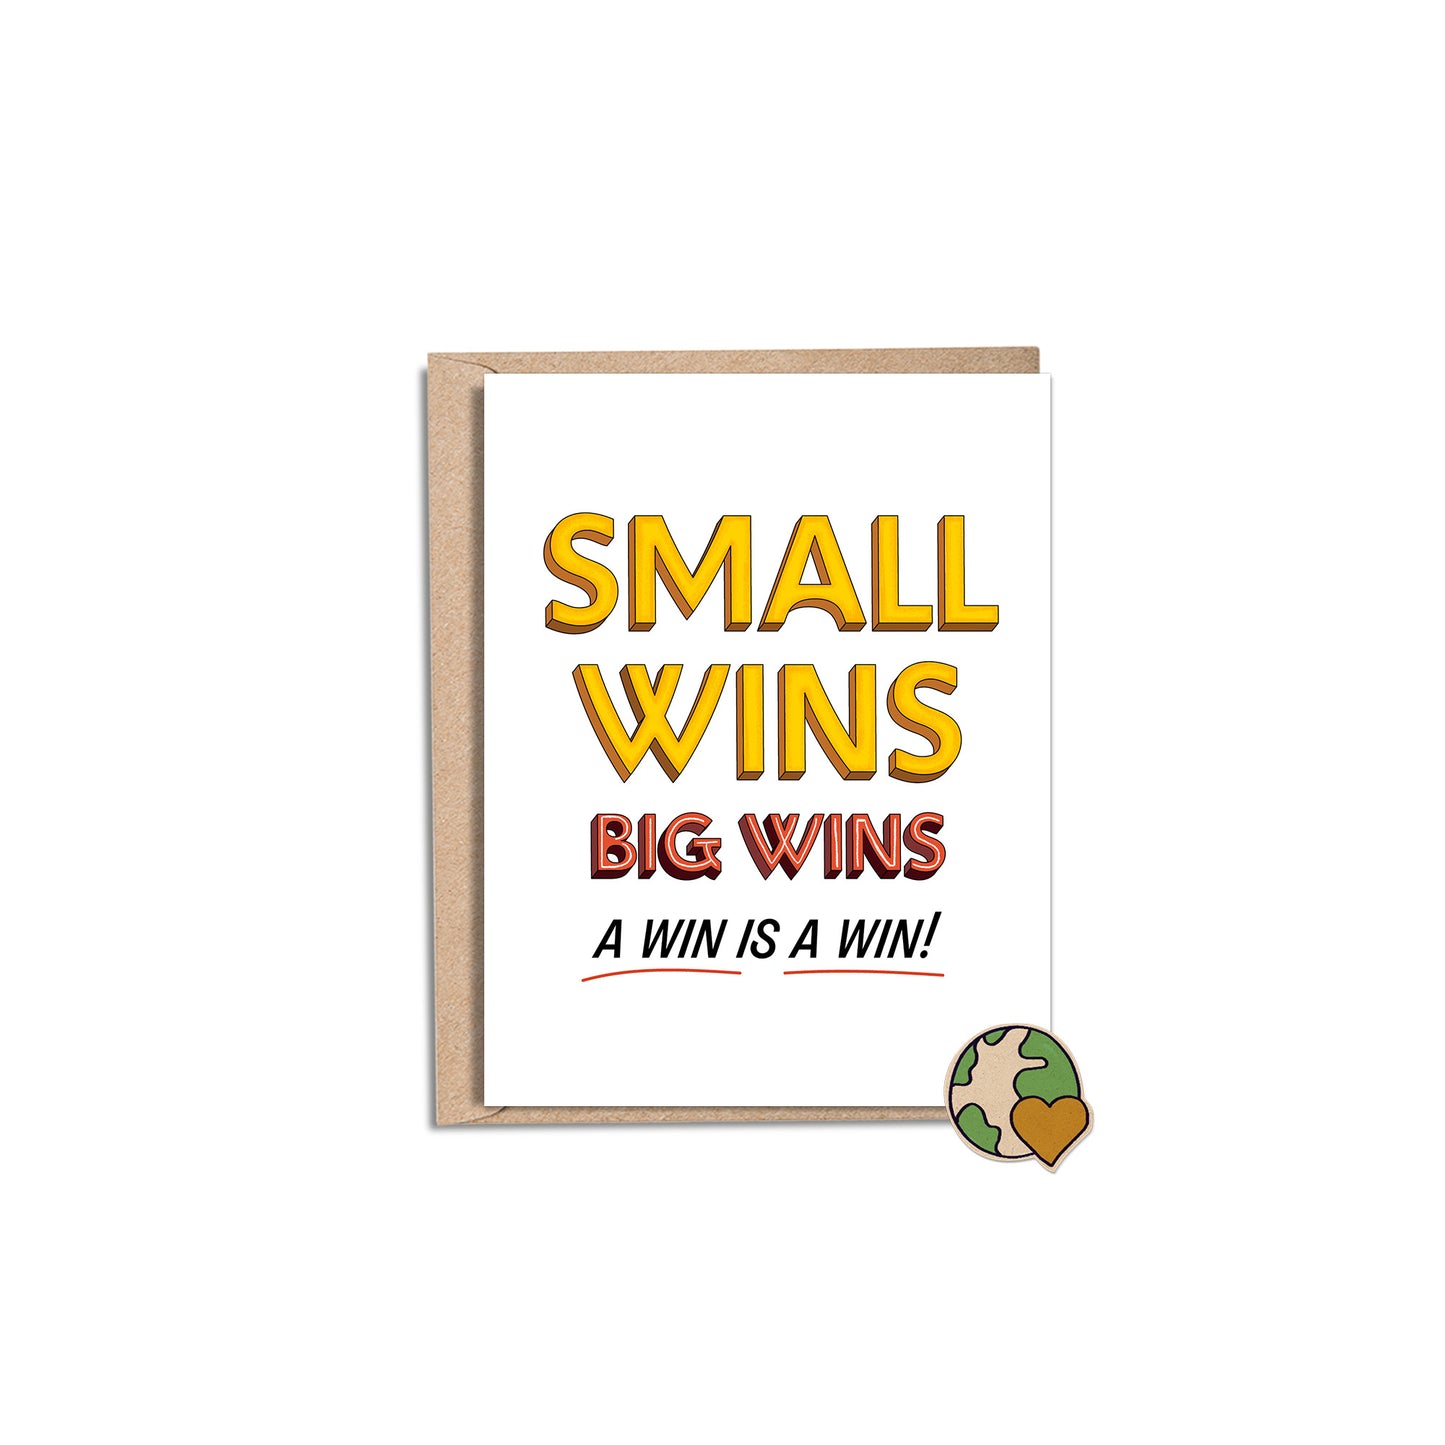 Celebrate Wins 4.25x5.5” A2 Encouraging, celebrate, congratulations, achievement, big opportunity, greeting cards from Goods Made By Digitrillnana, Ashley Fletcher. Black Woman Owned. Perfect card to cheer on or celebrate a friend!